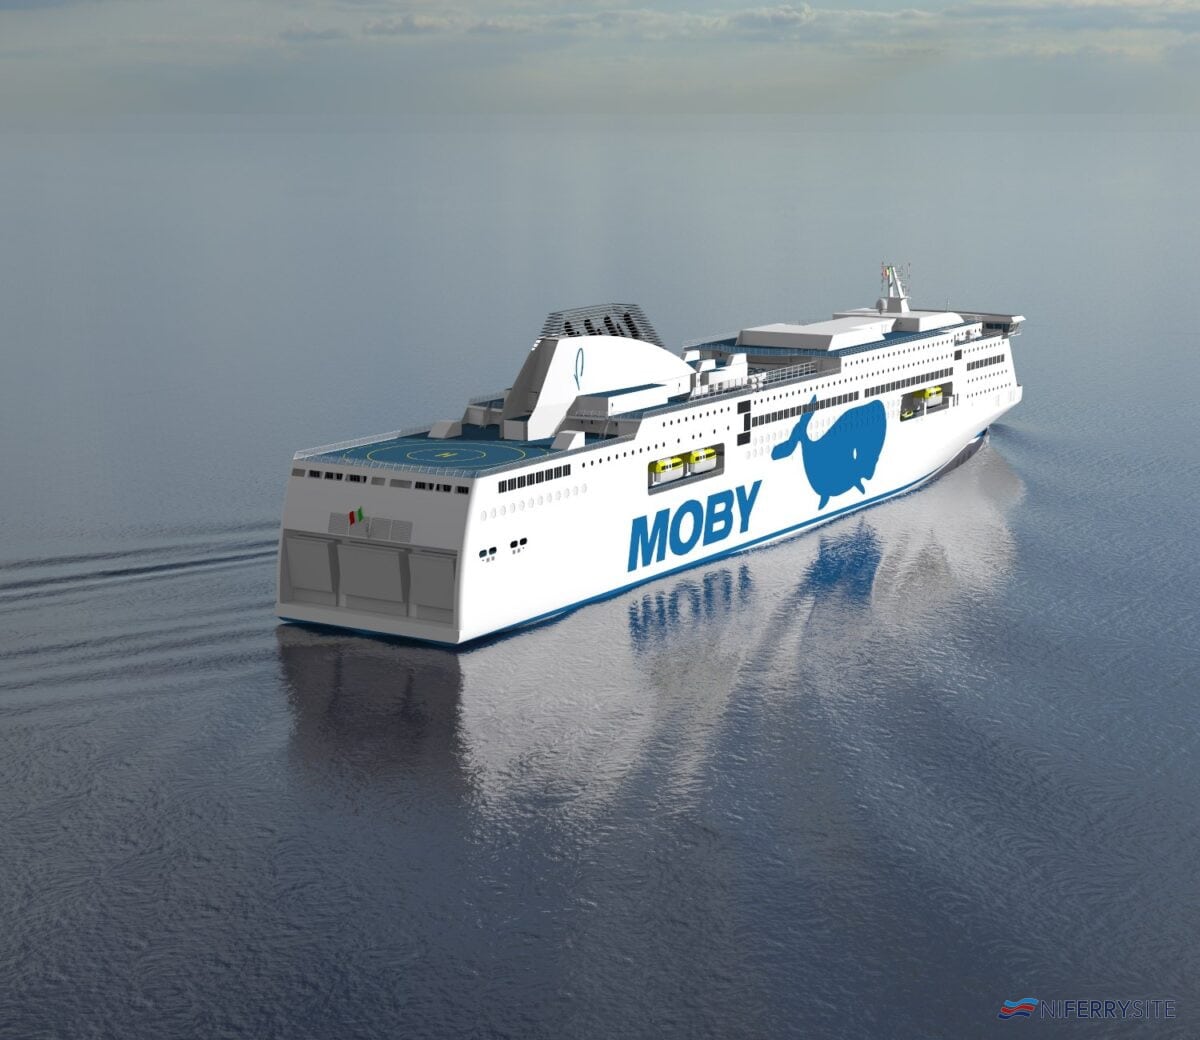 A render of the first of Moby Line's giant Ro-Pax's on order at Guangzhou Shipyard International, to be named MOBY FANTASY. Moby Lines